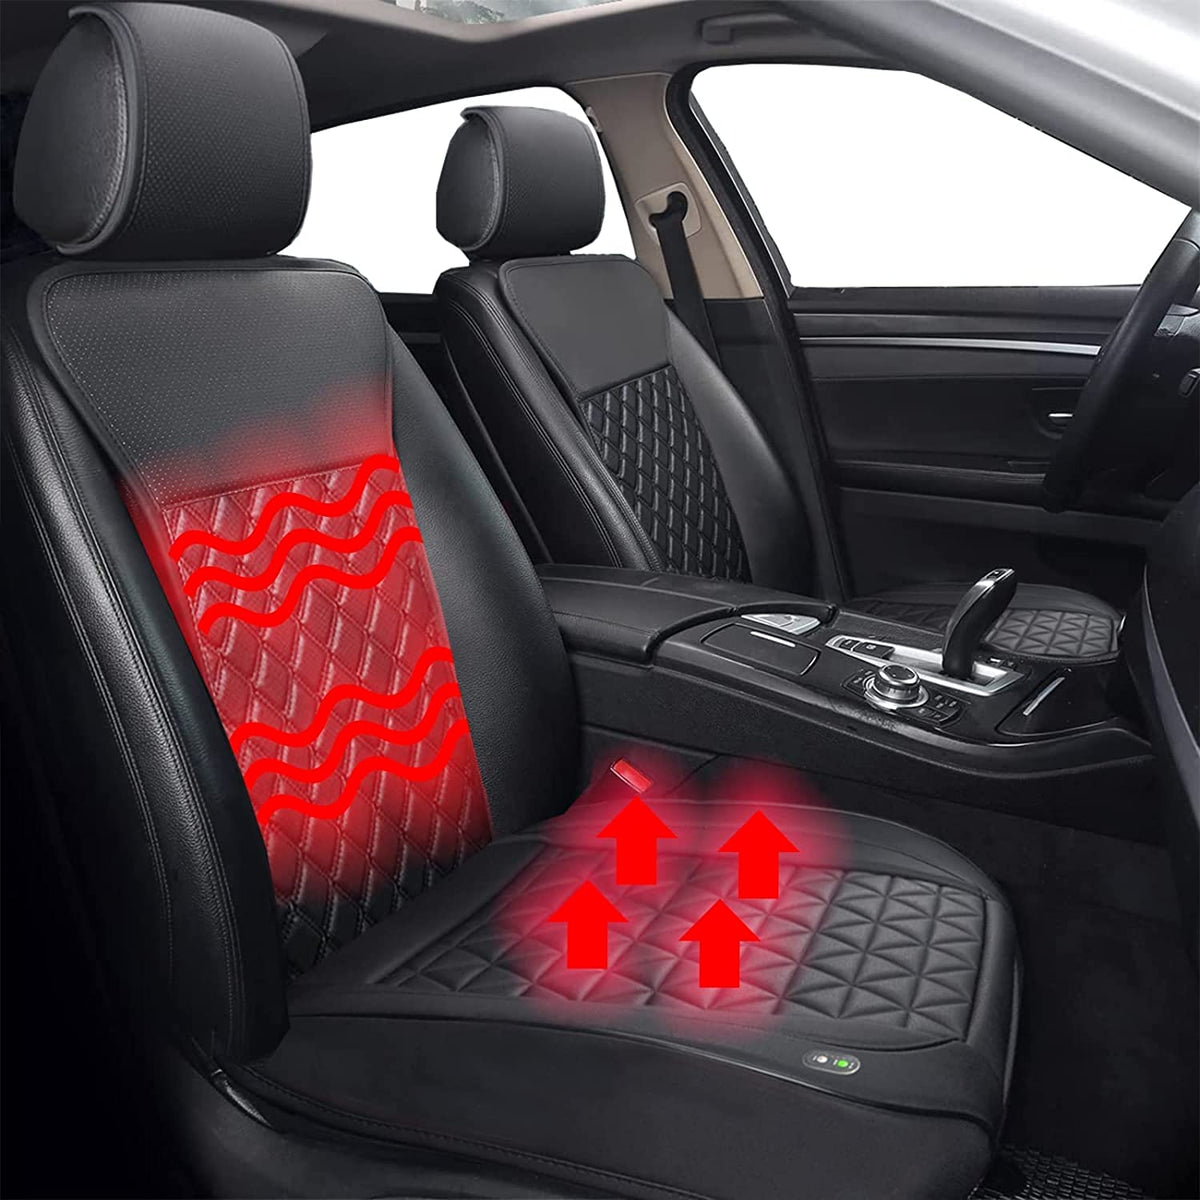 Heated Seat Cushion for Full Back and Seat – Exclusive Covers USA